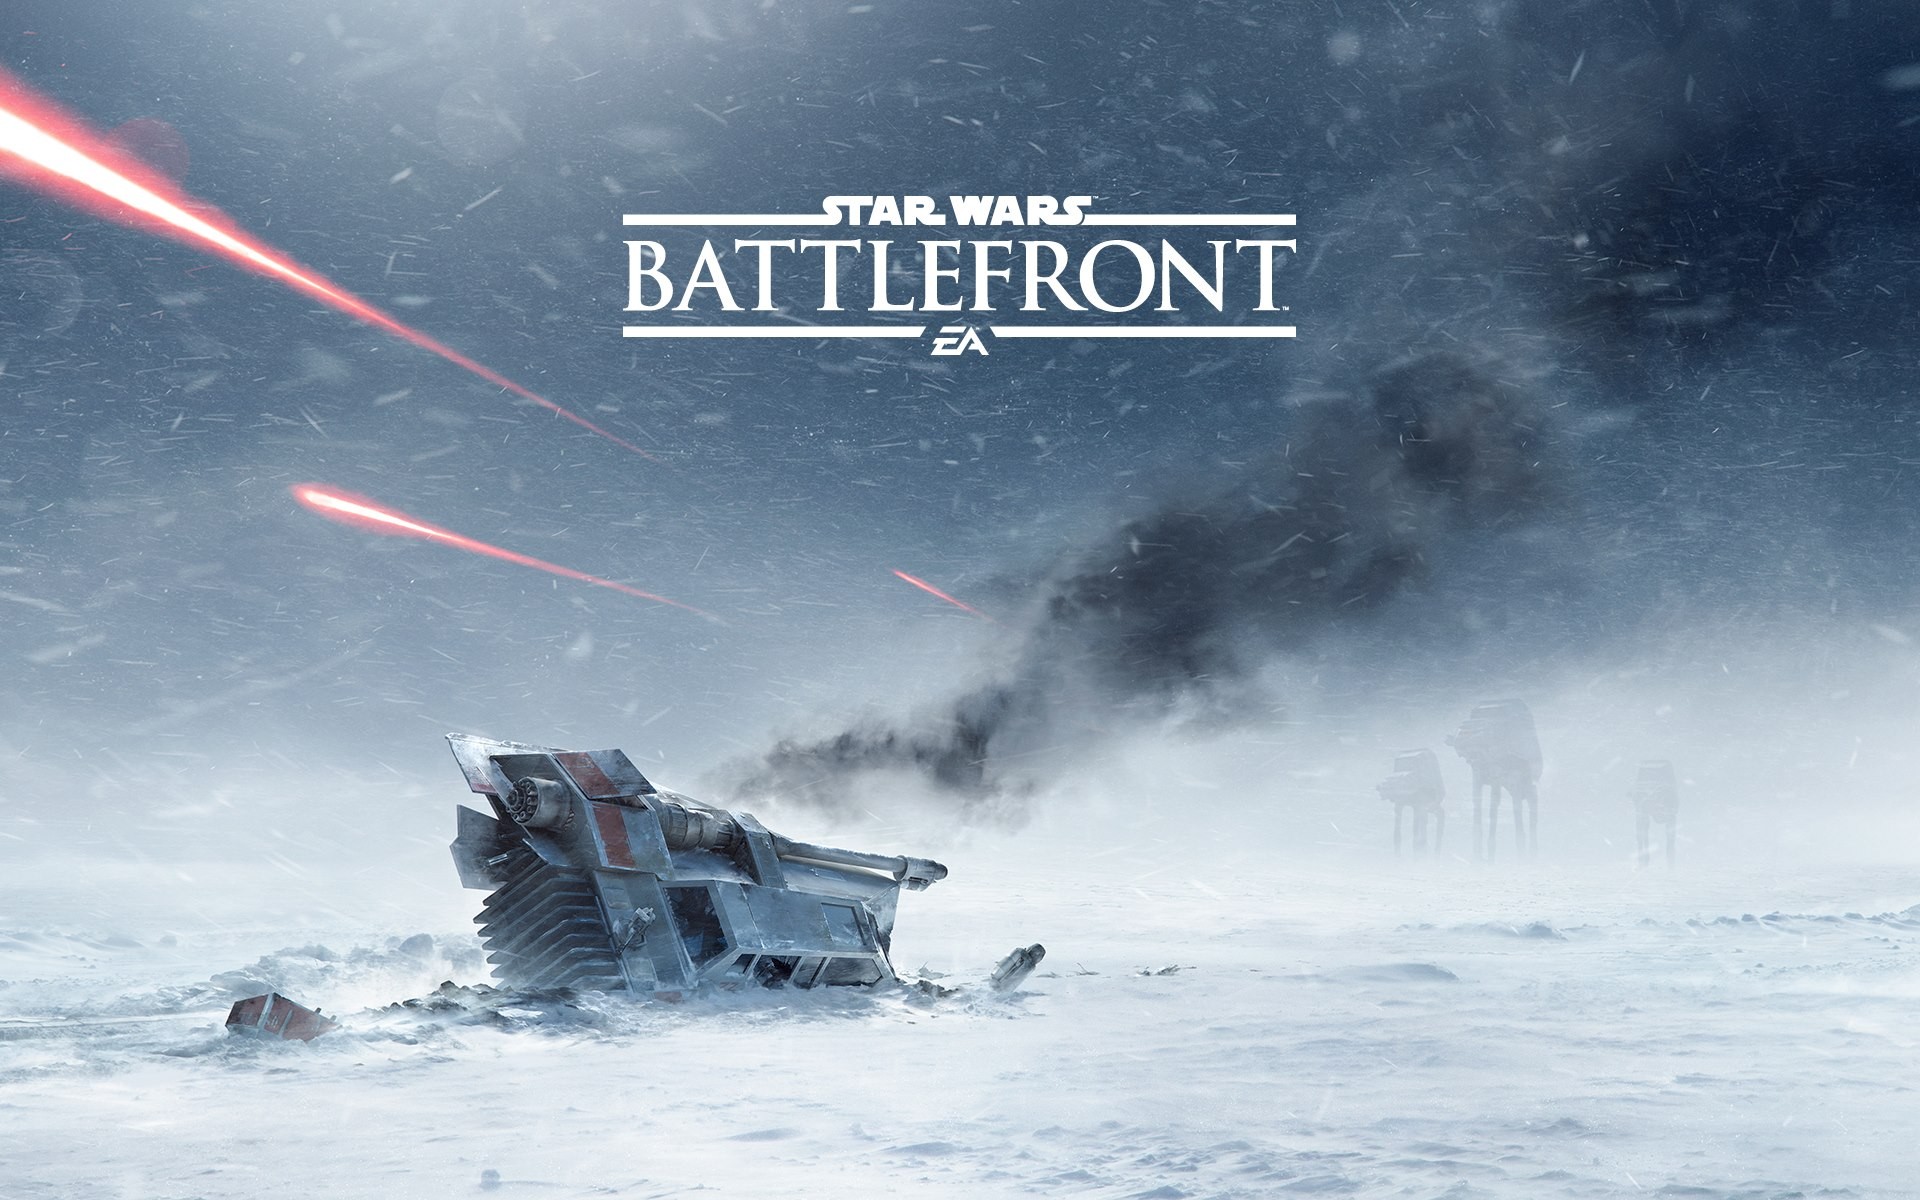 General 1920x1200 Star Wars Star Wars: Battlefront video games Hoth snow LucasArts Battle of Hoth EA DICE wreck video game art T-47 airspeeder  battle science fiction AT-AT